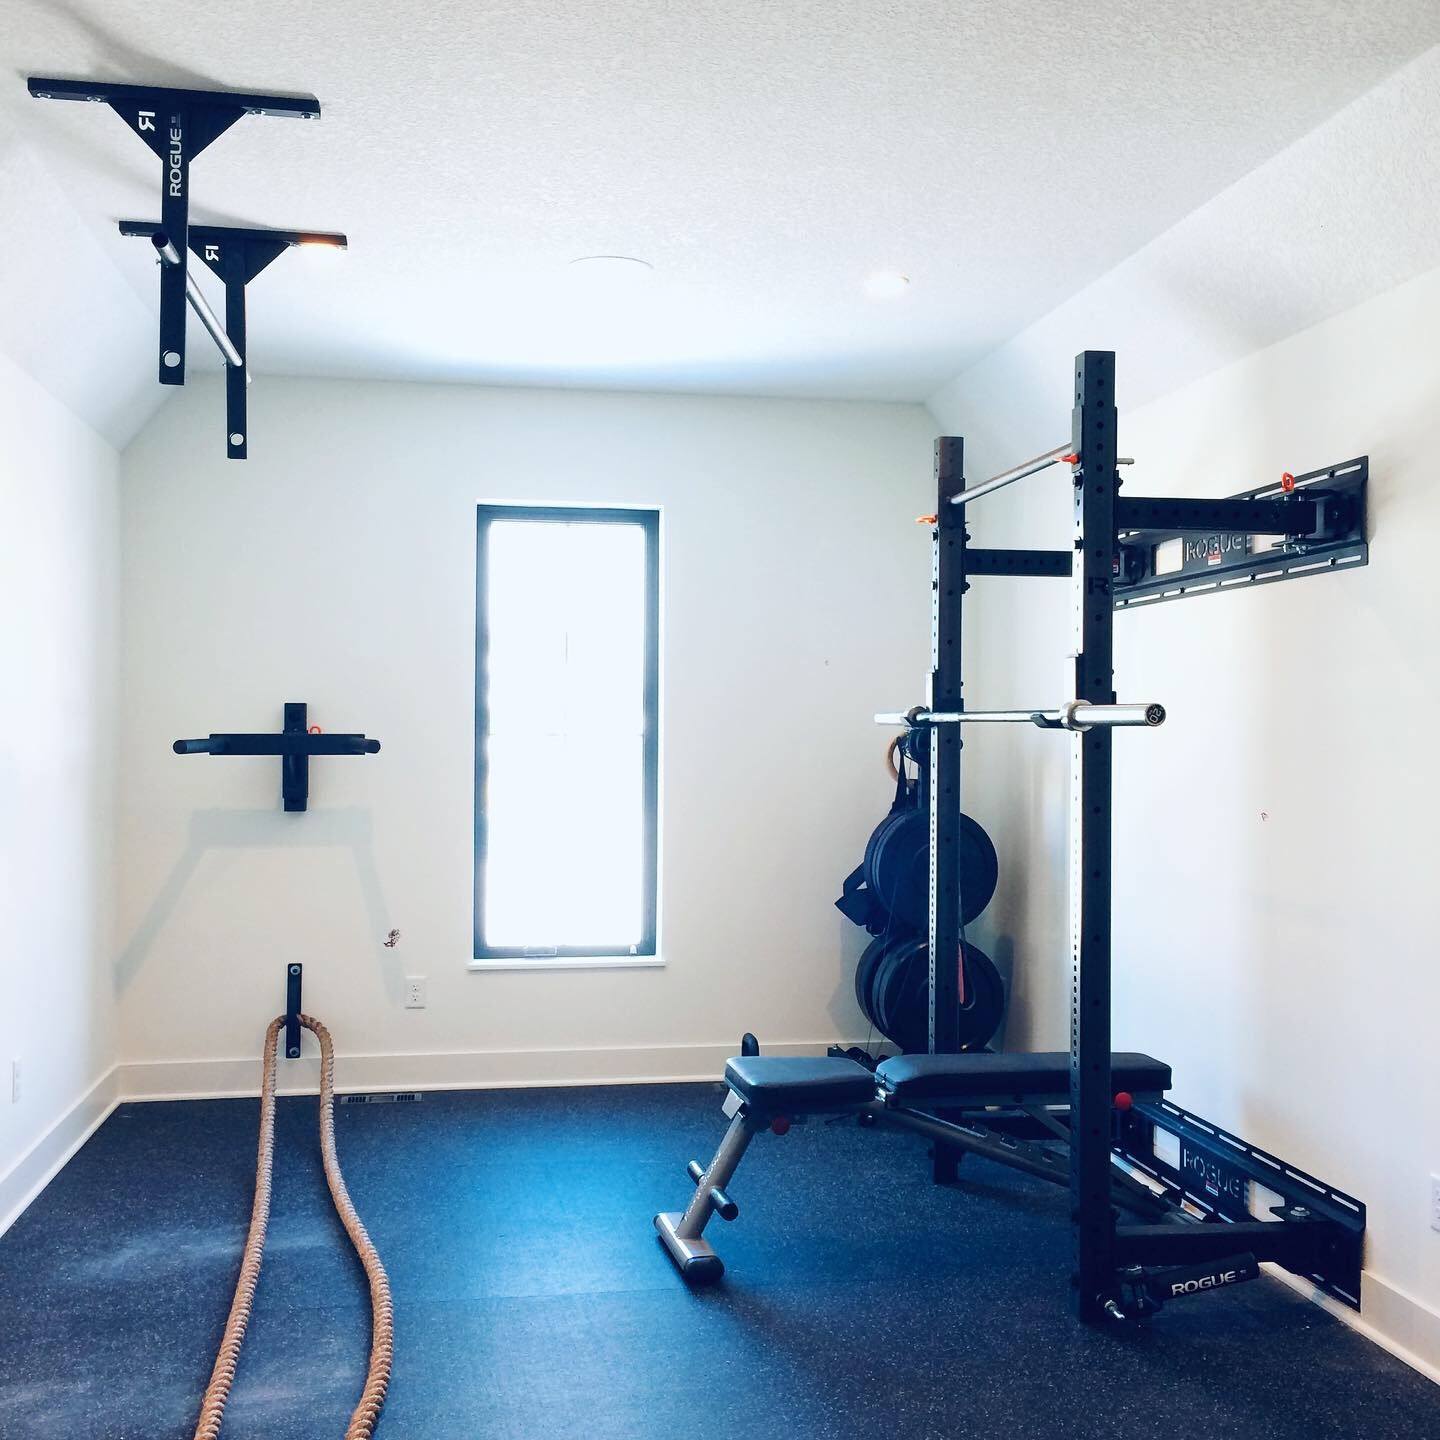 HDH Exercise Room Assembly